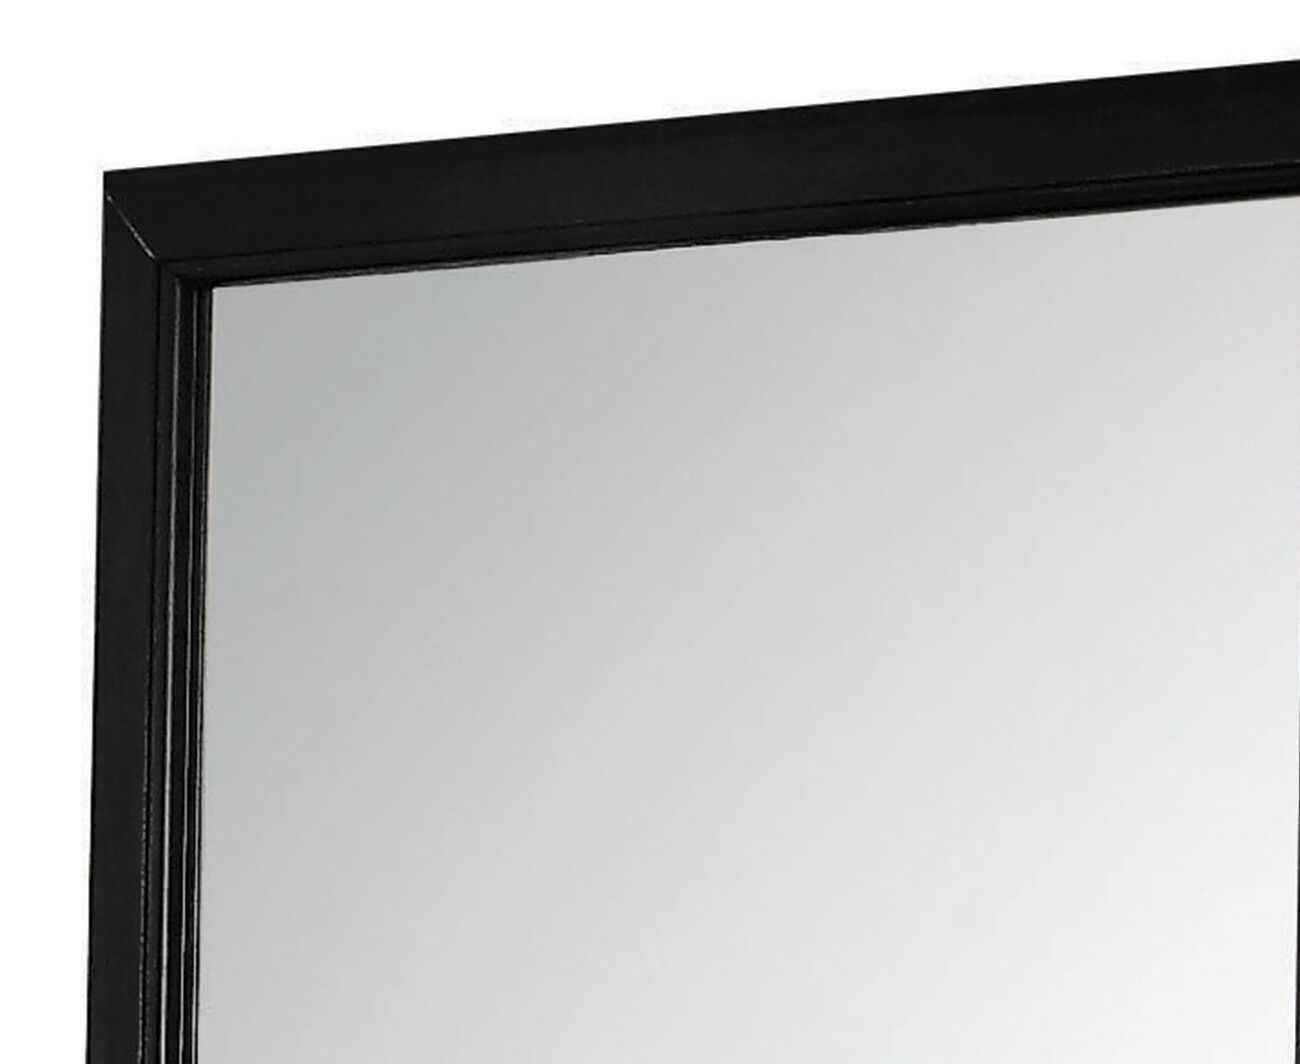 Transitional Style Mirror with Raised Wooden Frame, Black and Silver